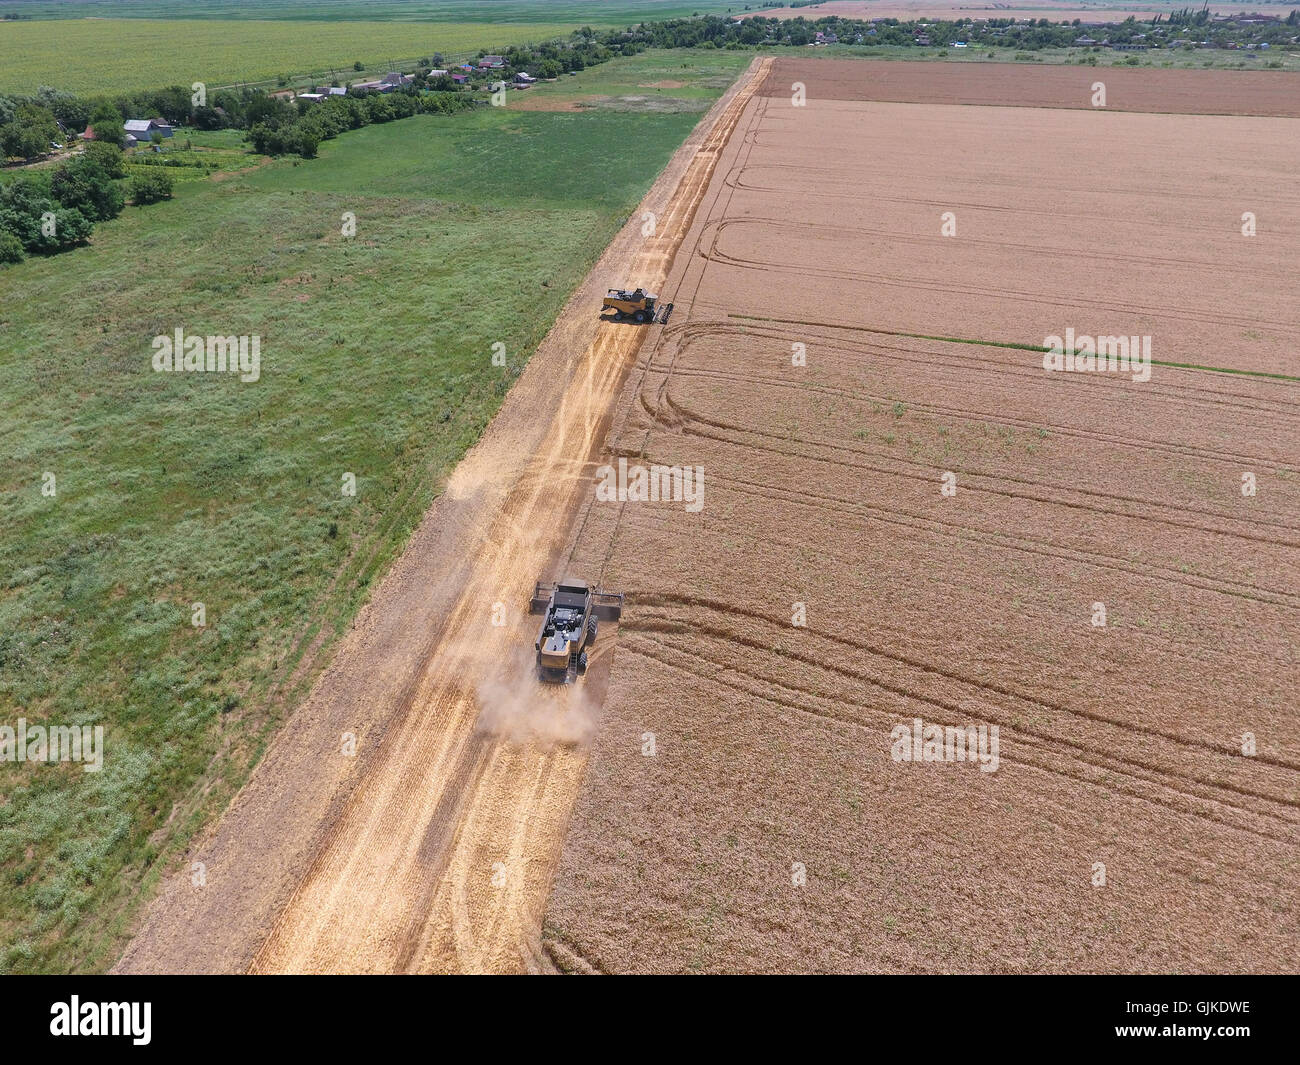 Harvesting wheat harvester. Agricultural machinery in operation. Stock Photo